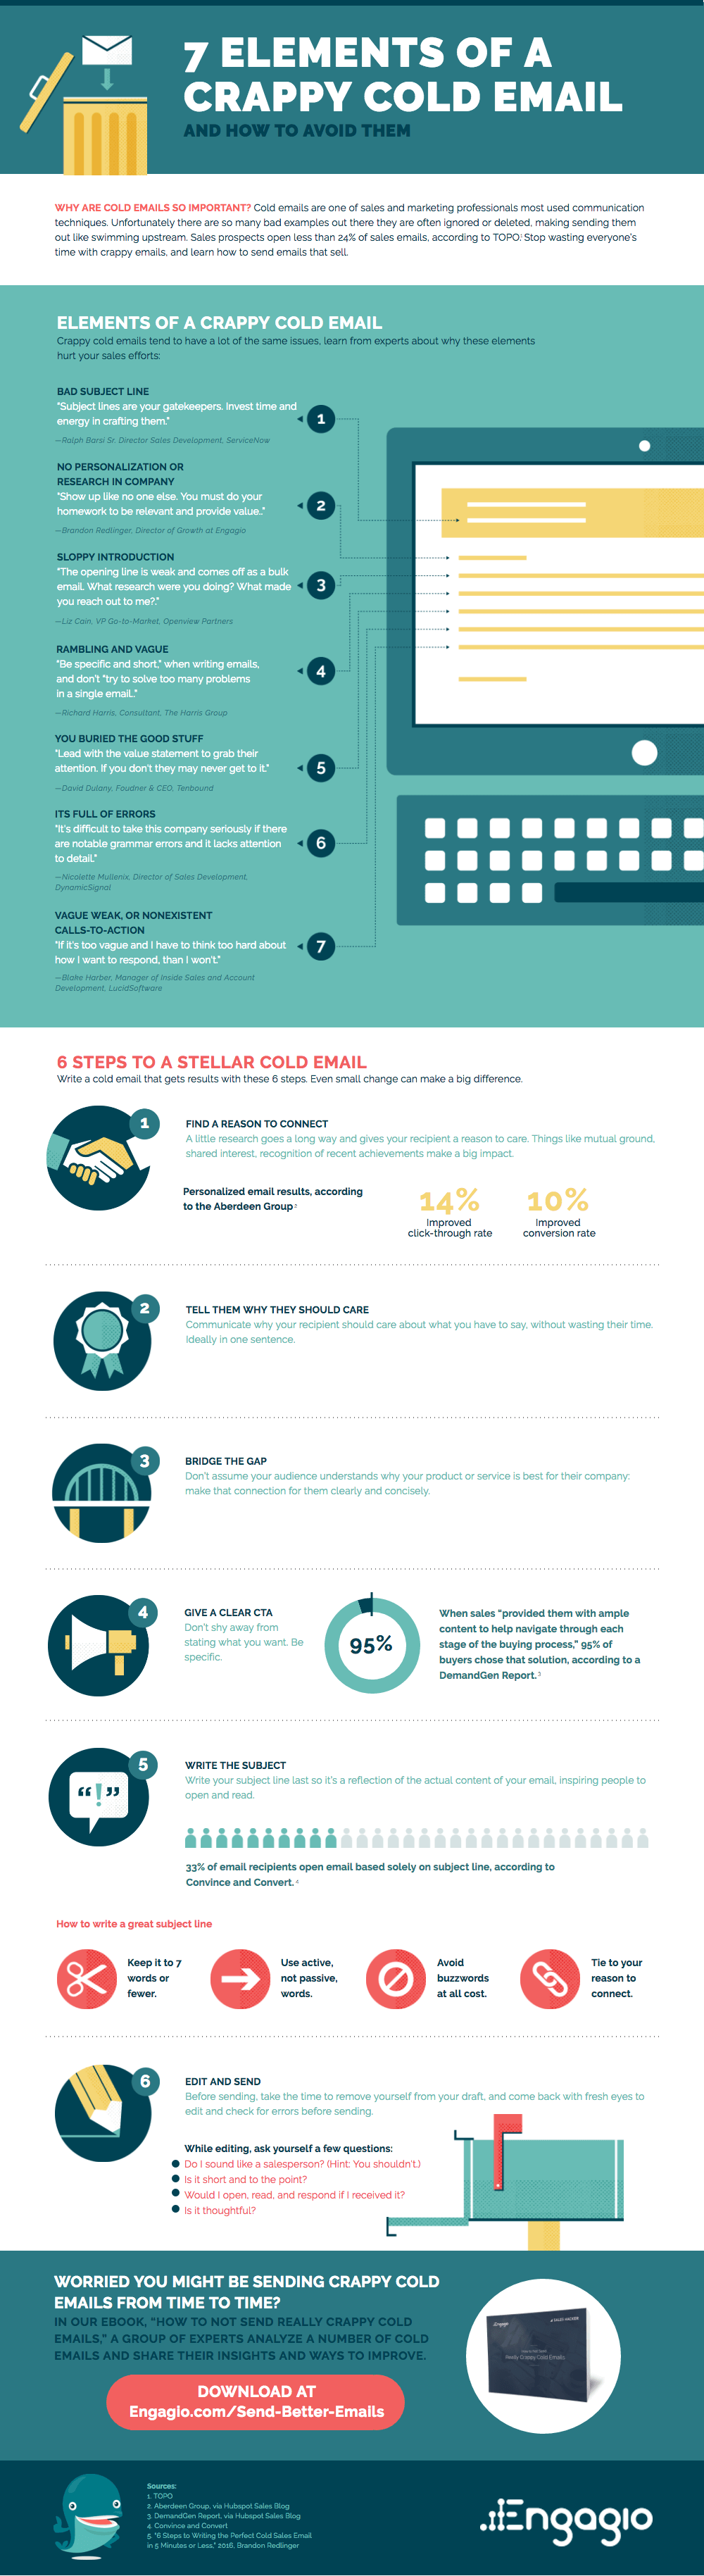 7 Elements of a Crappy Cold Email and How to Avoid Them - #Infographic